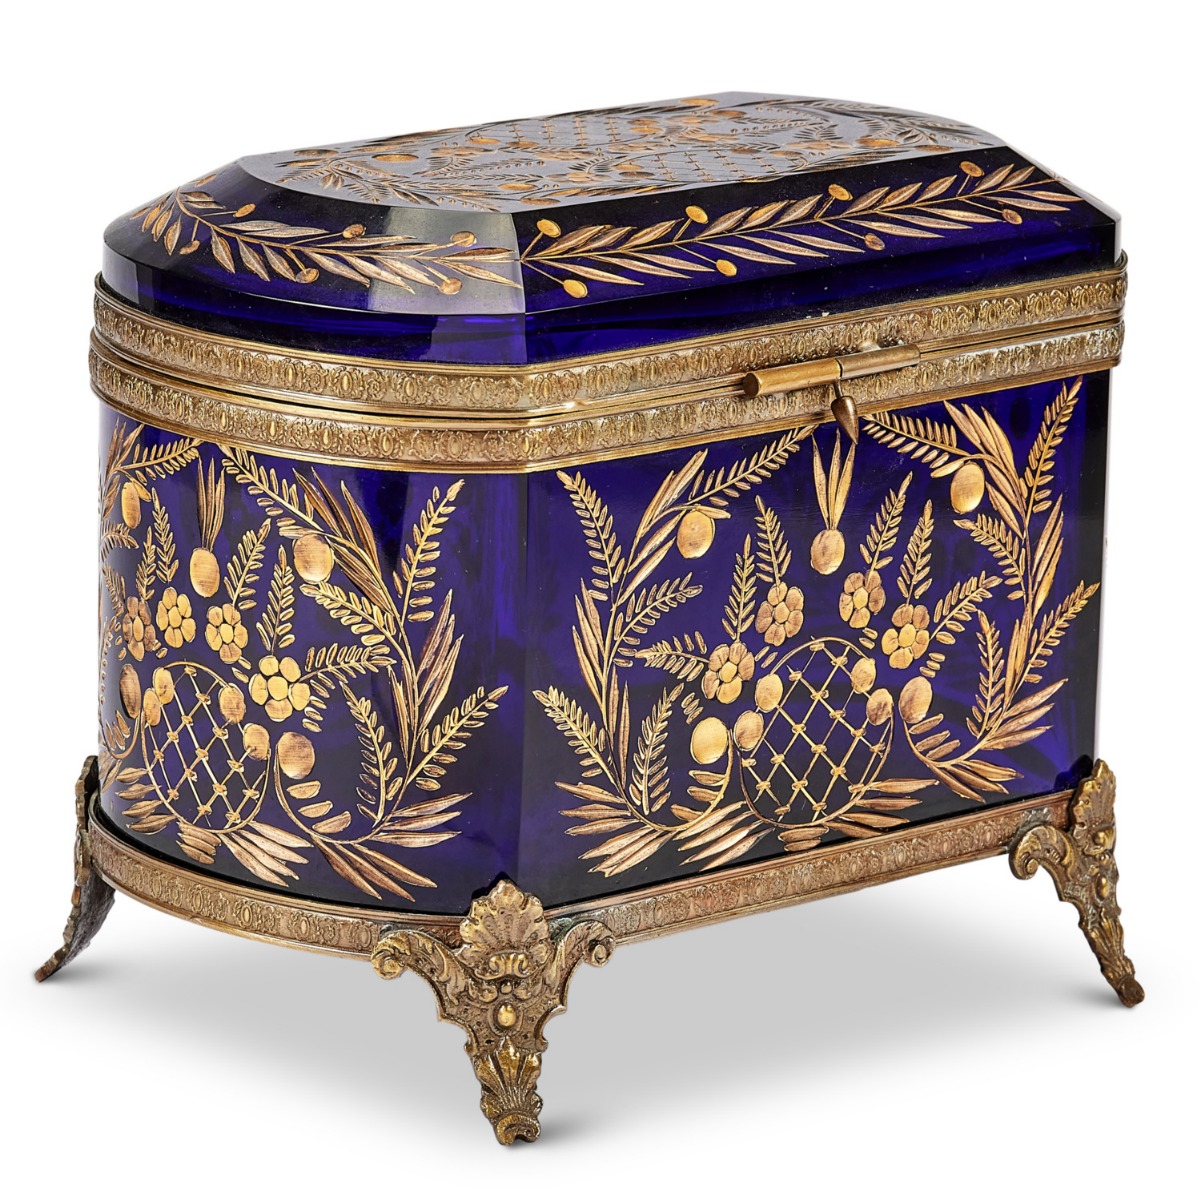 A 19th century French blue etched glass and gilded casket